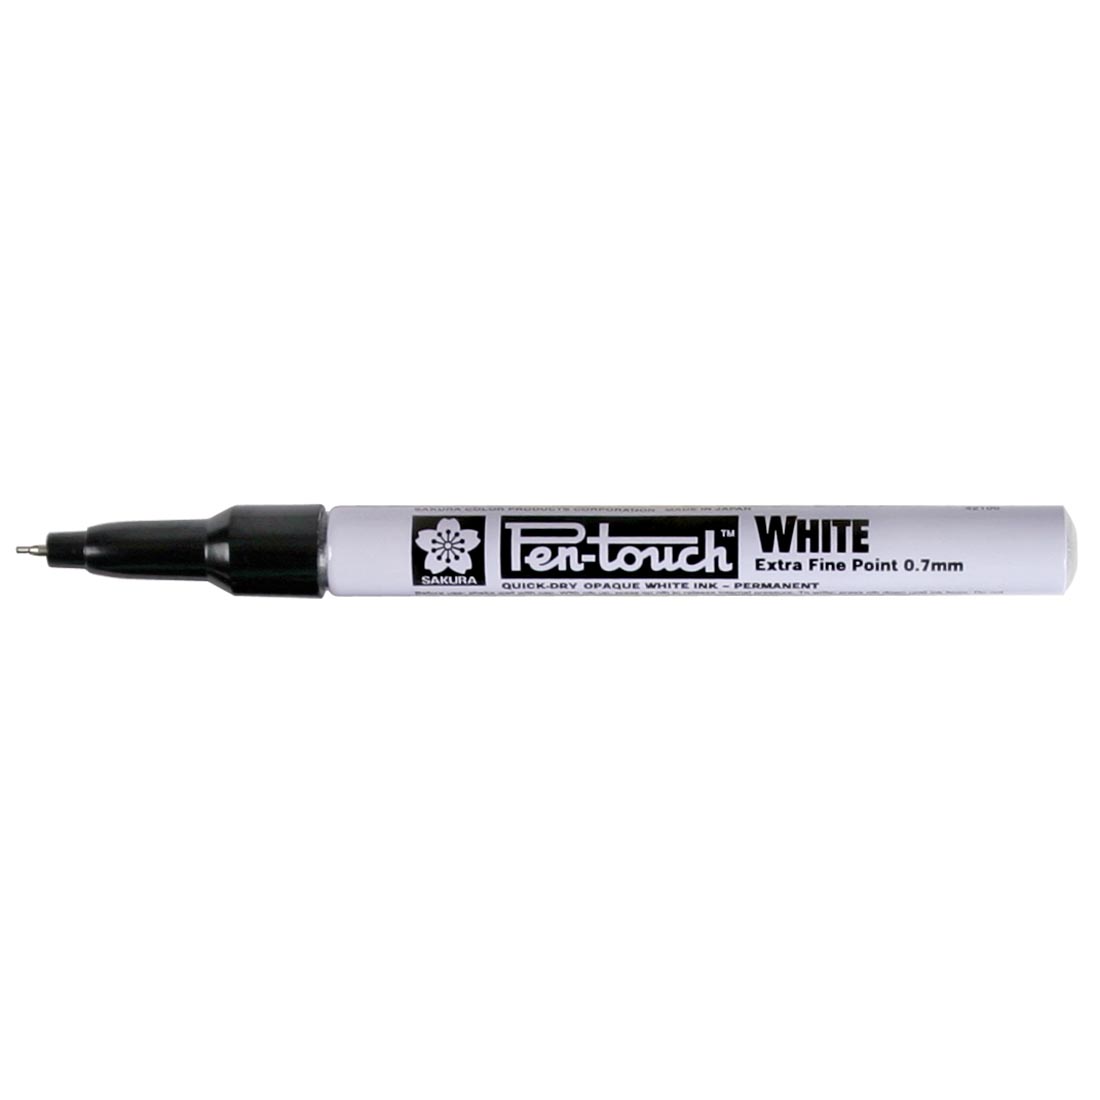 Sakura Pen-Touch Opaque Marker Extra Fine Point White without cap